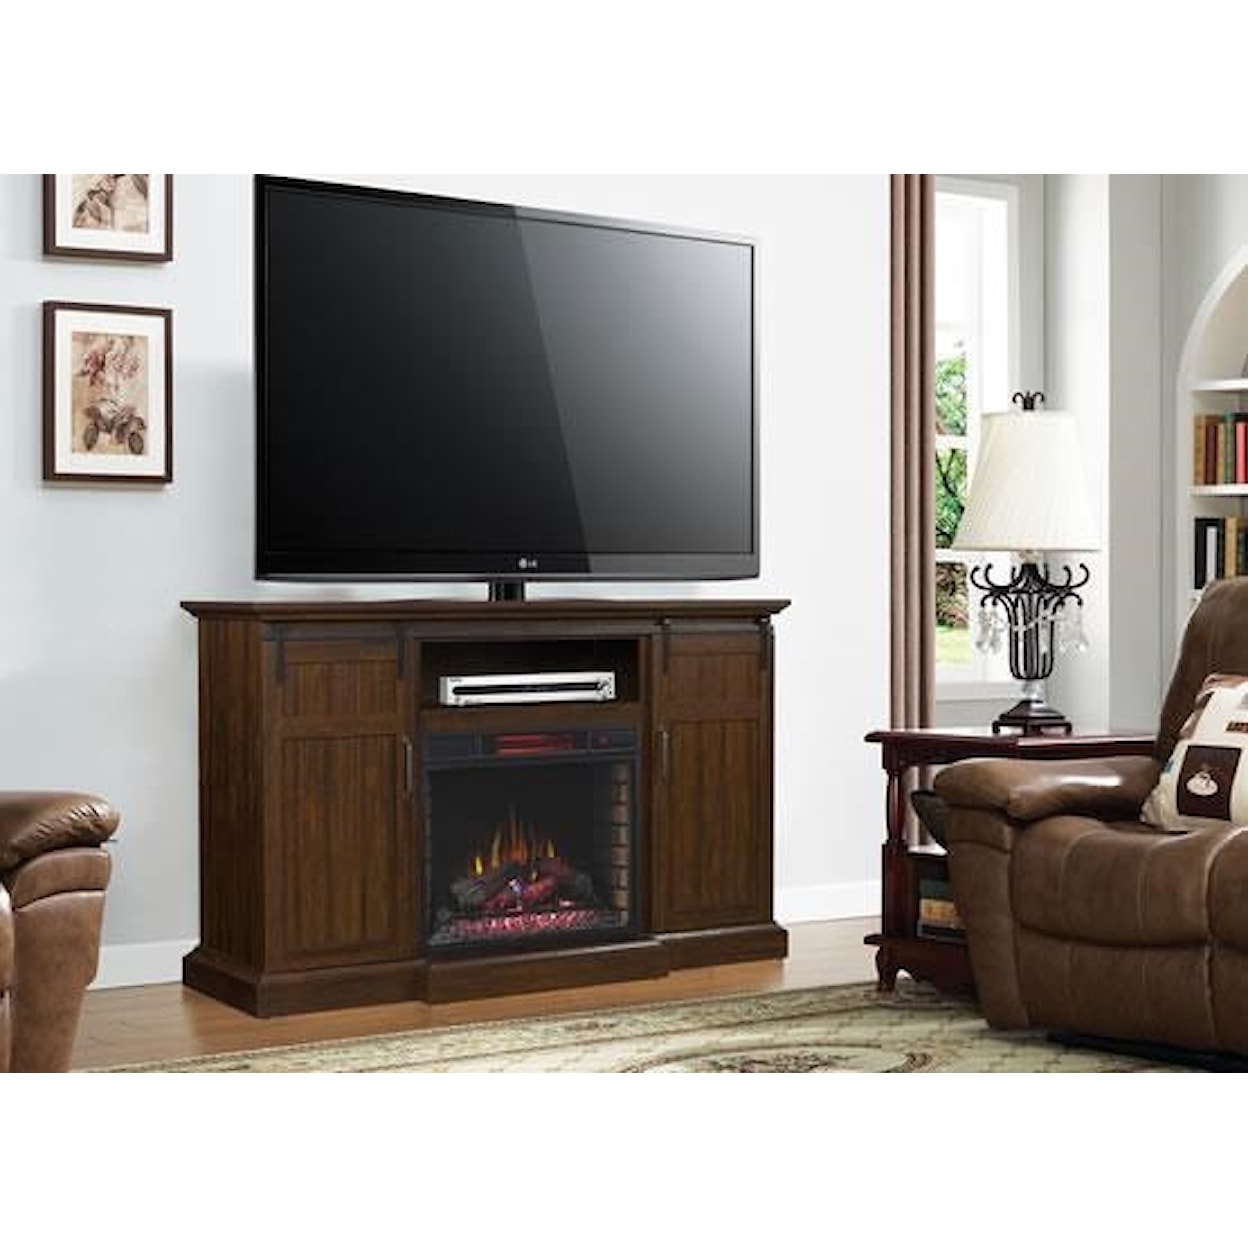 ClassicFlame Manning TV Console Mantel & Fireplace Insert  with S